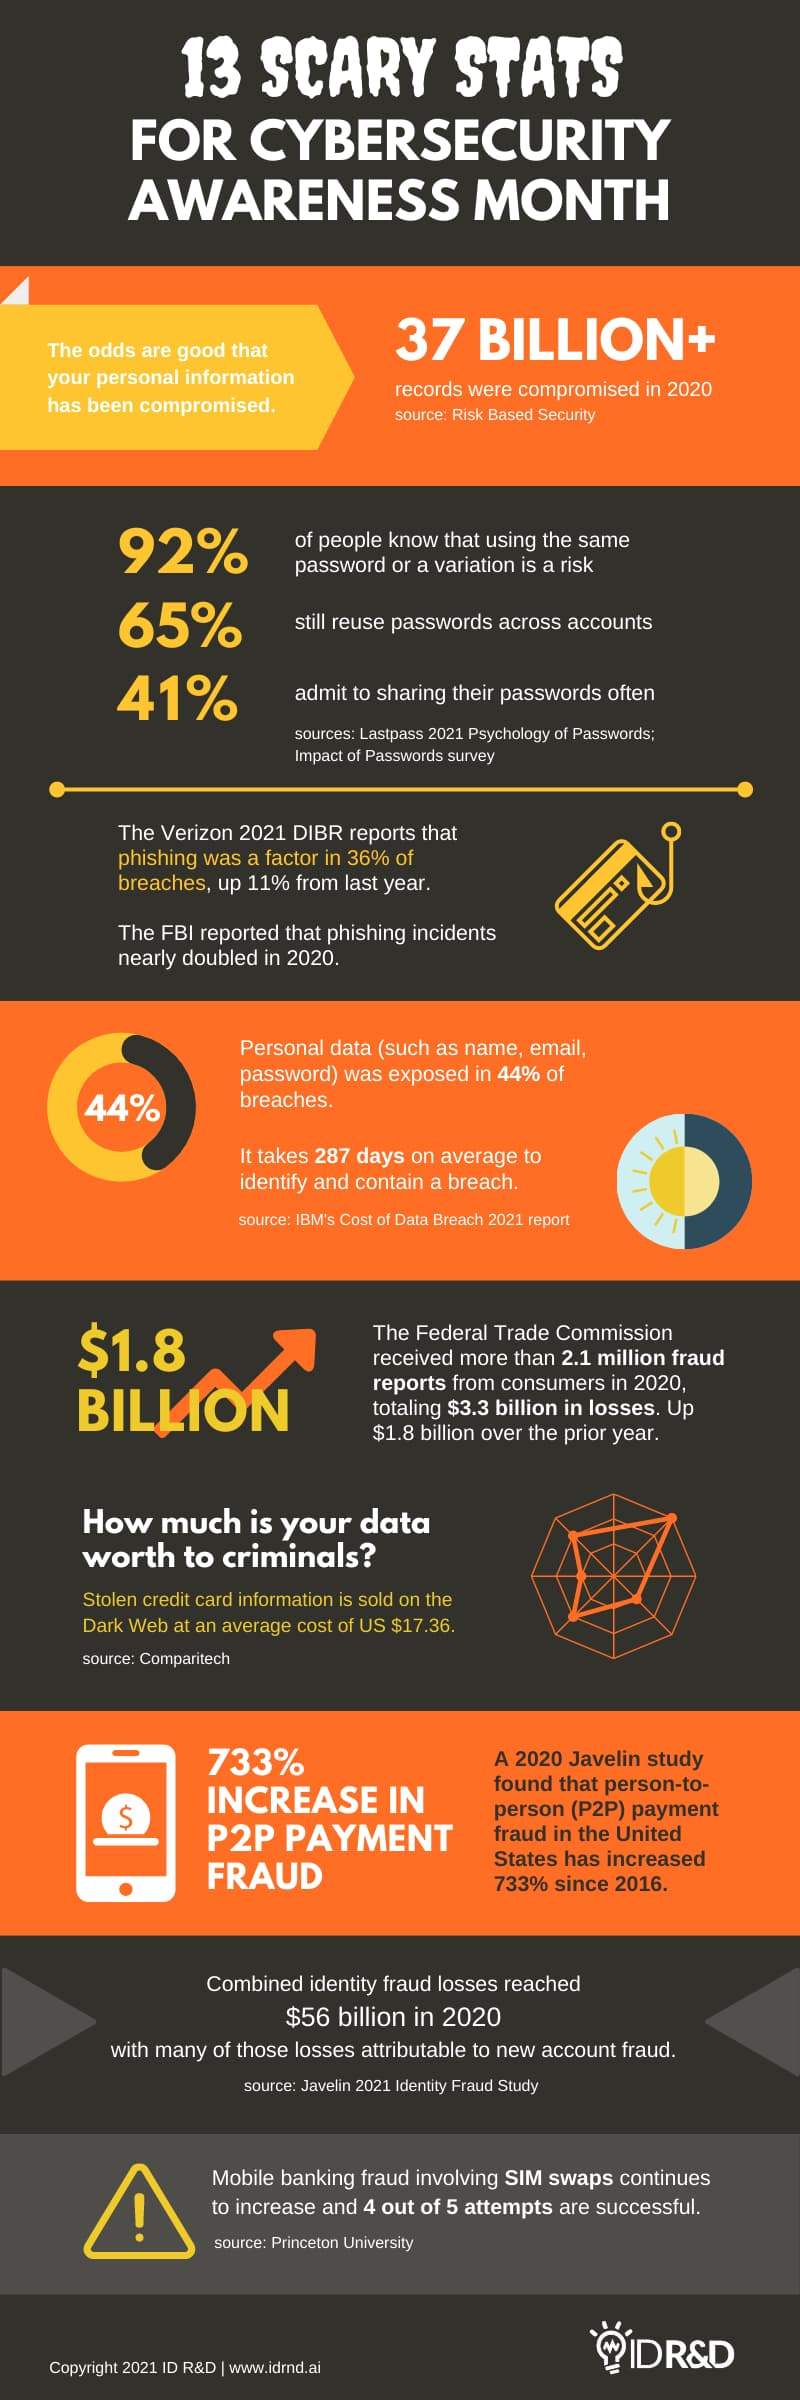 13-Scary-Cybersecurity-Statistics-Infographic